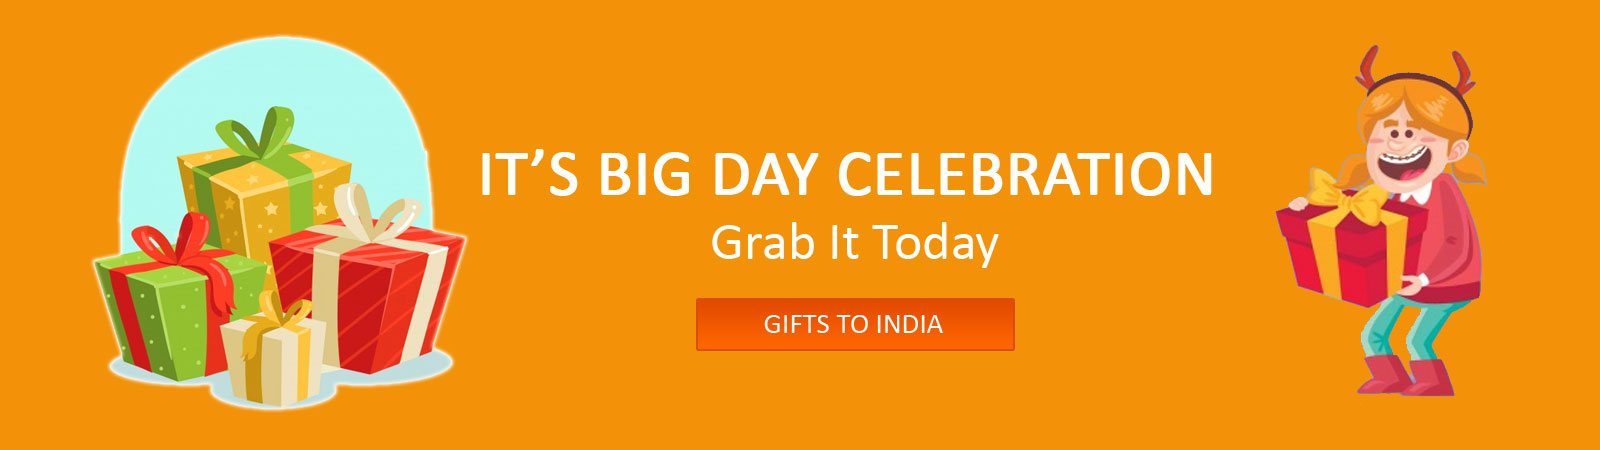 Send gifts to India- online gifts delivery in India by best gifts shop